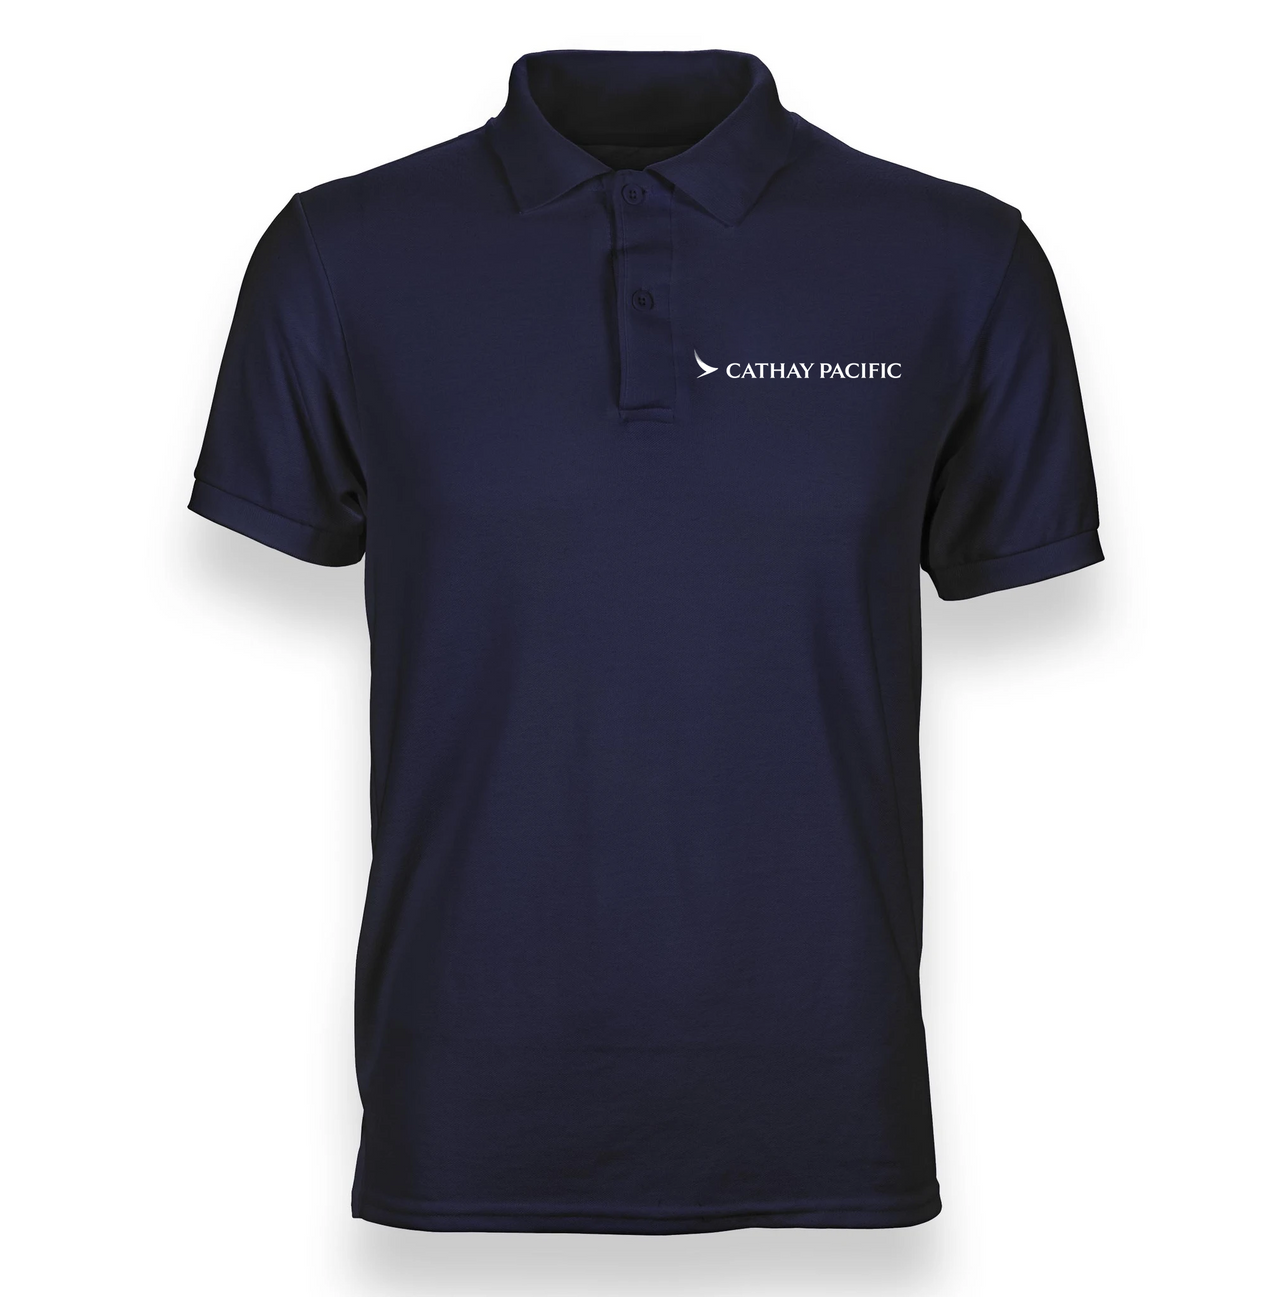 CATHAY AIRLINES POLO T-SHIRT